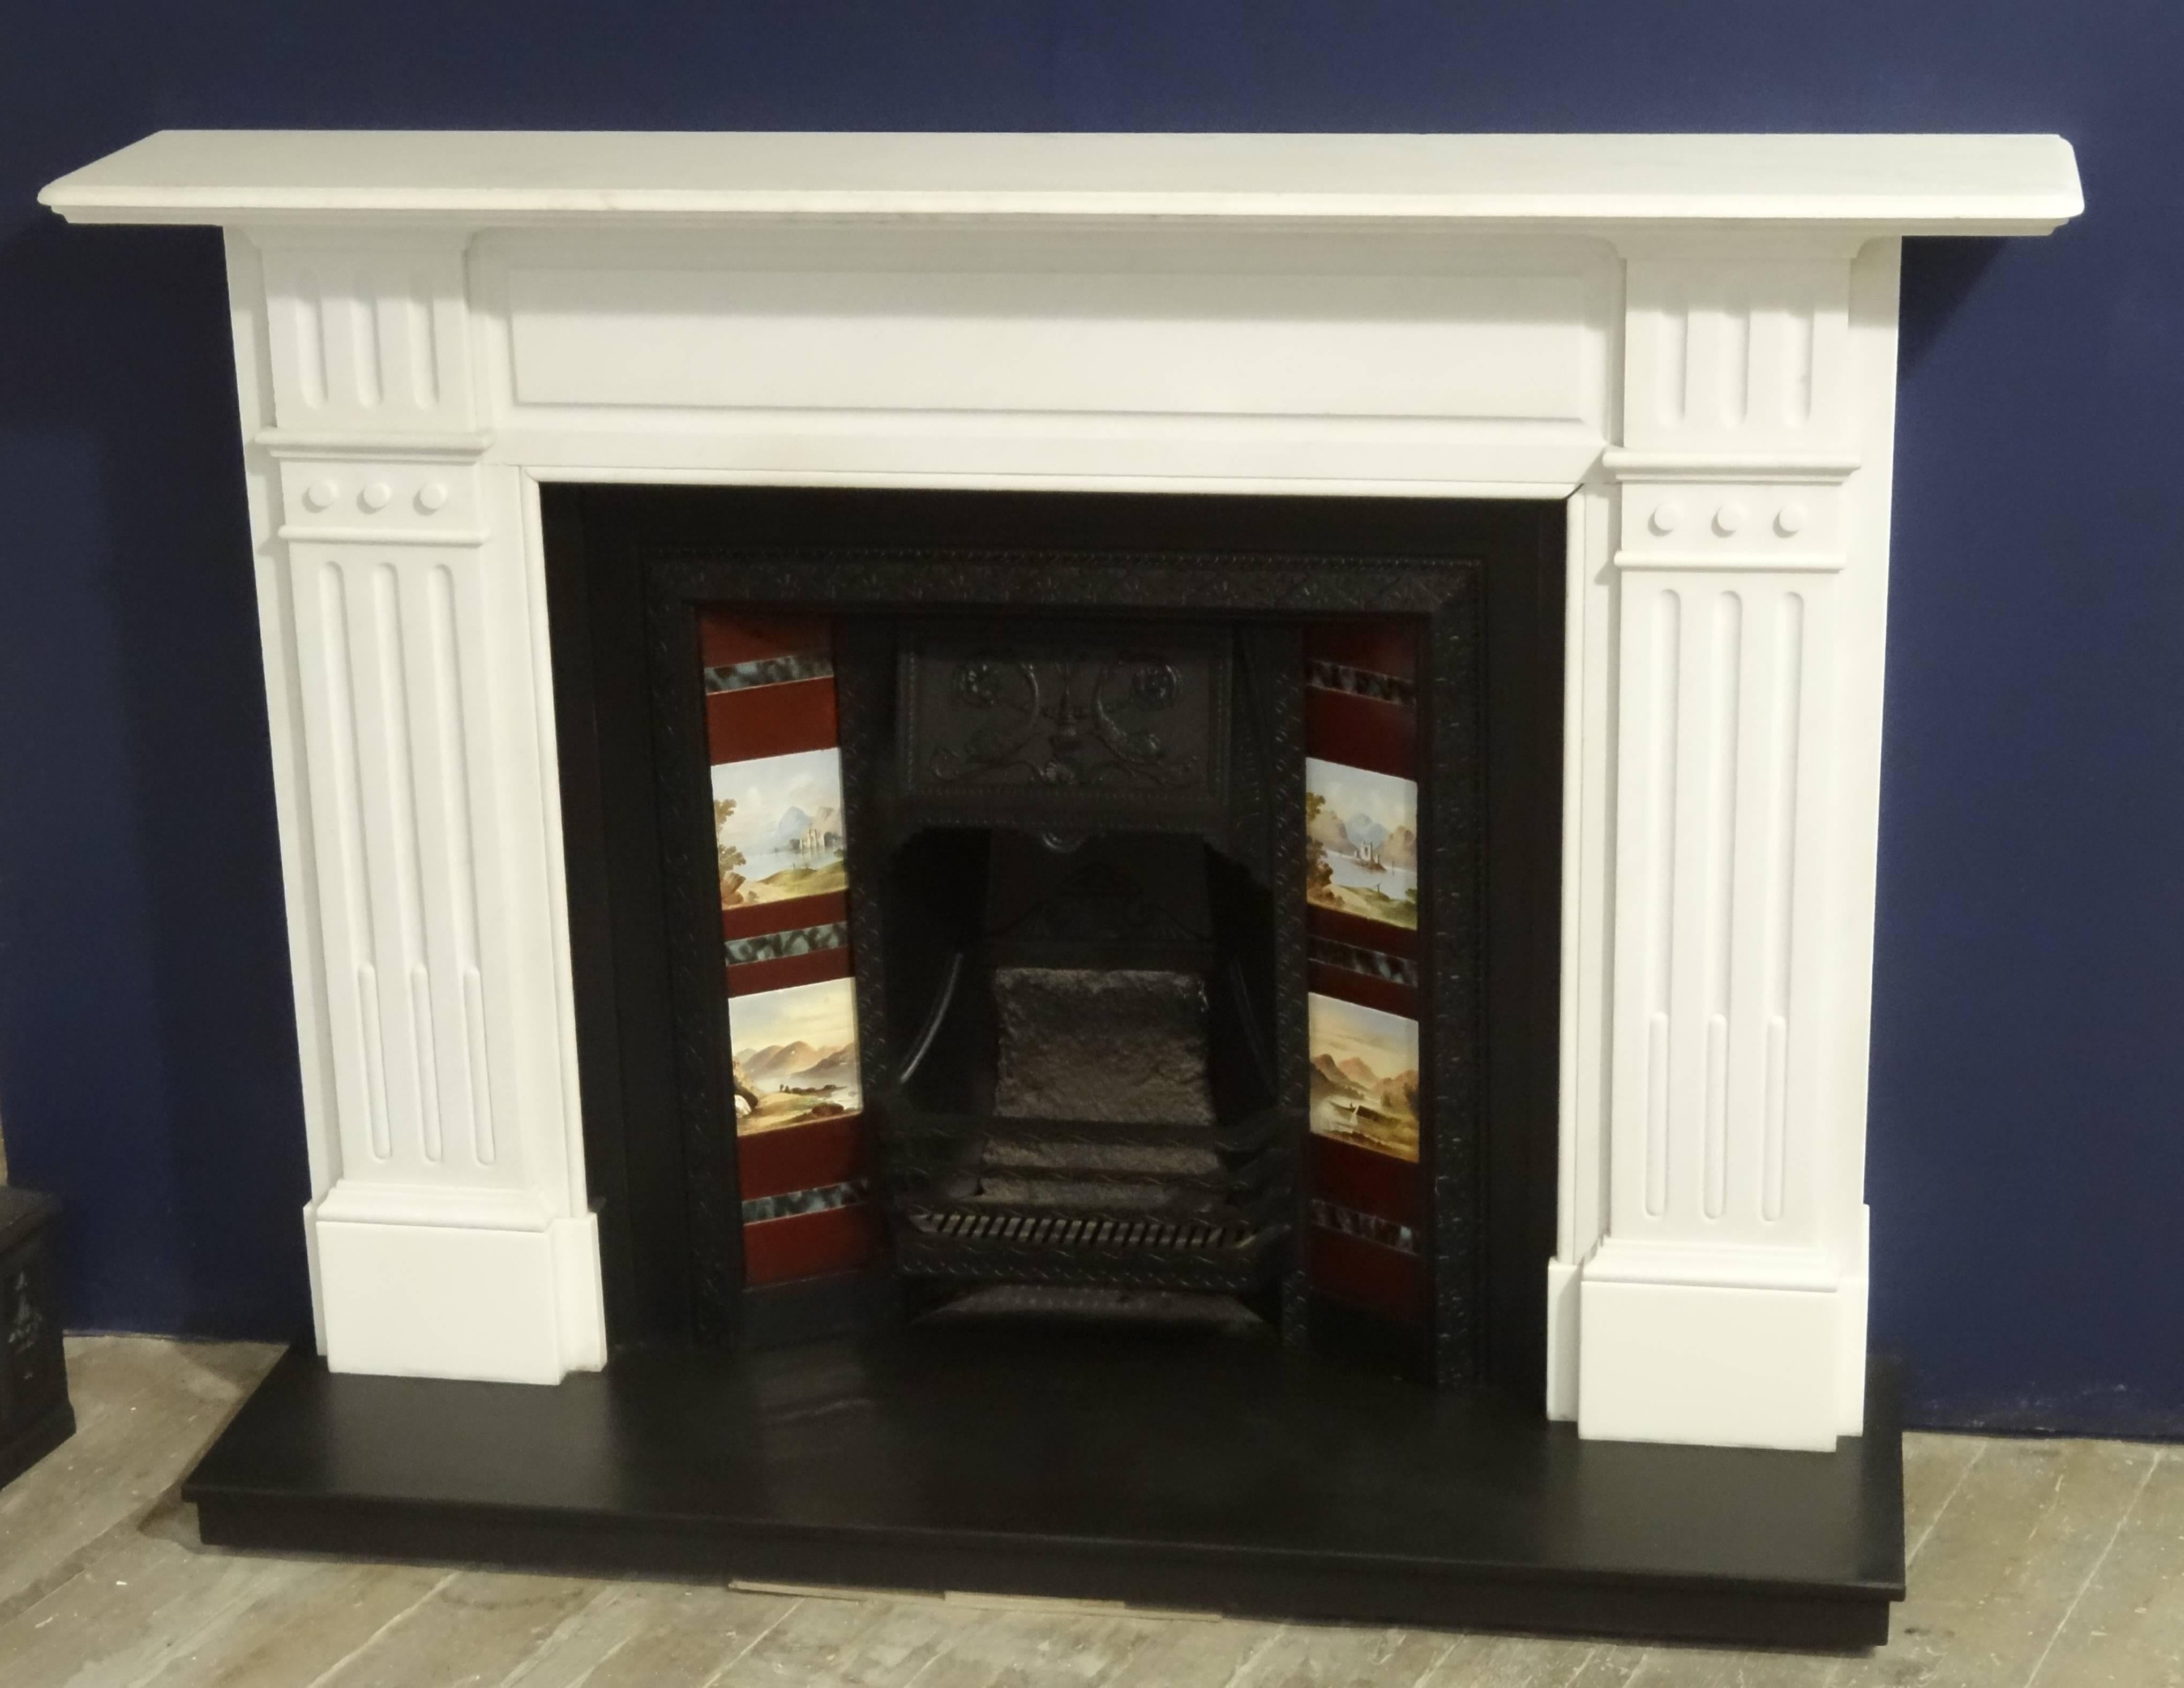 Substantial antique late Victorian white statuary marble fireplace surround. Reclaimed from a Victorian property in County Antrim Northern Ireland. Cast iron tiled insert and slate hearth shown are priced separately.

Internal aperture